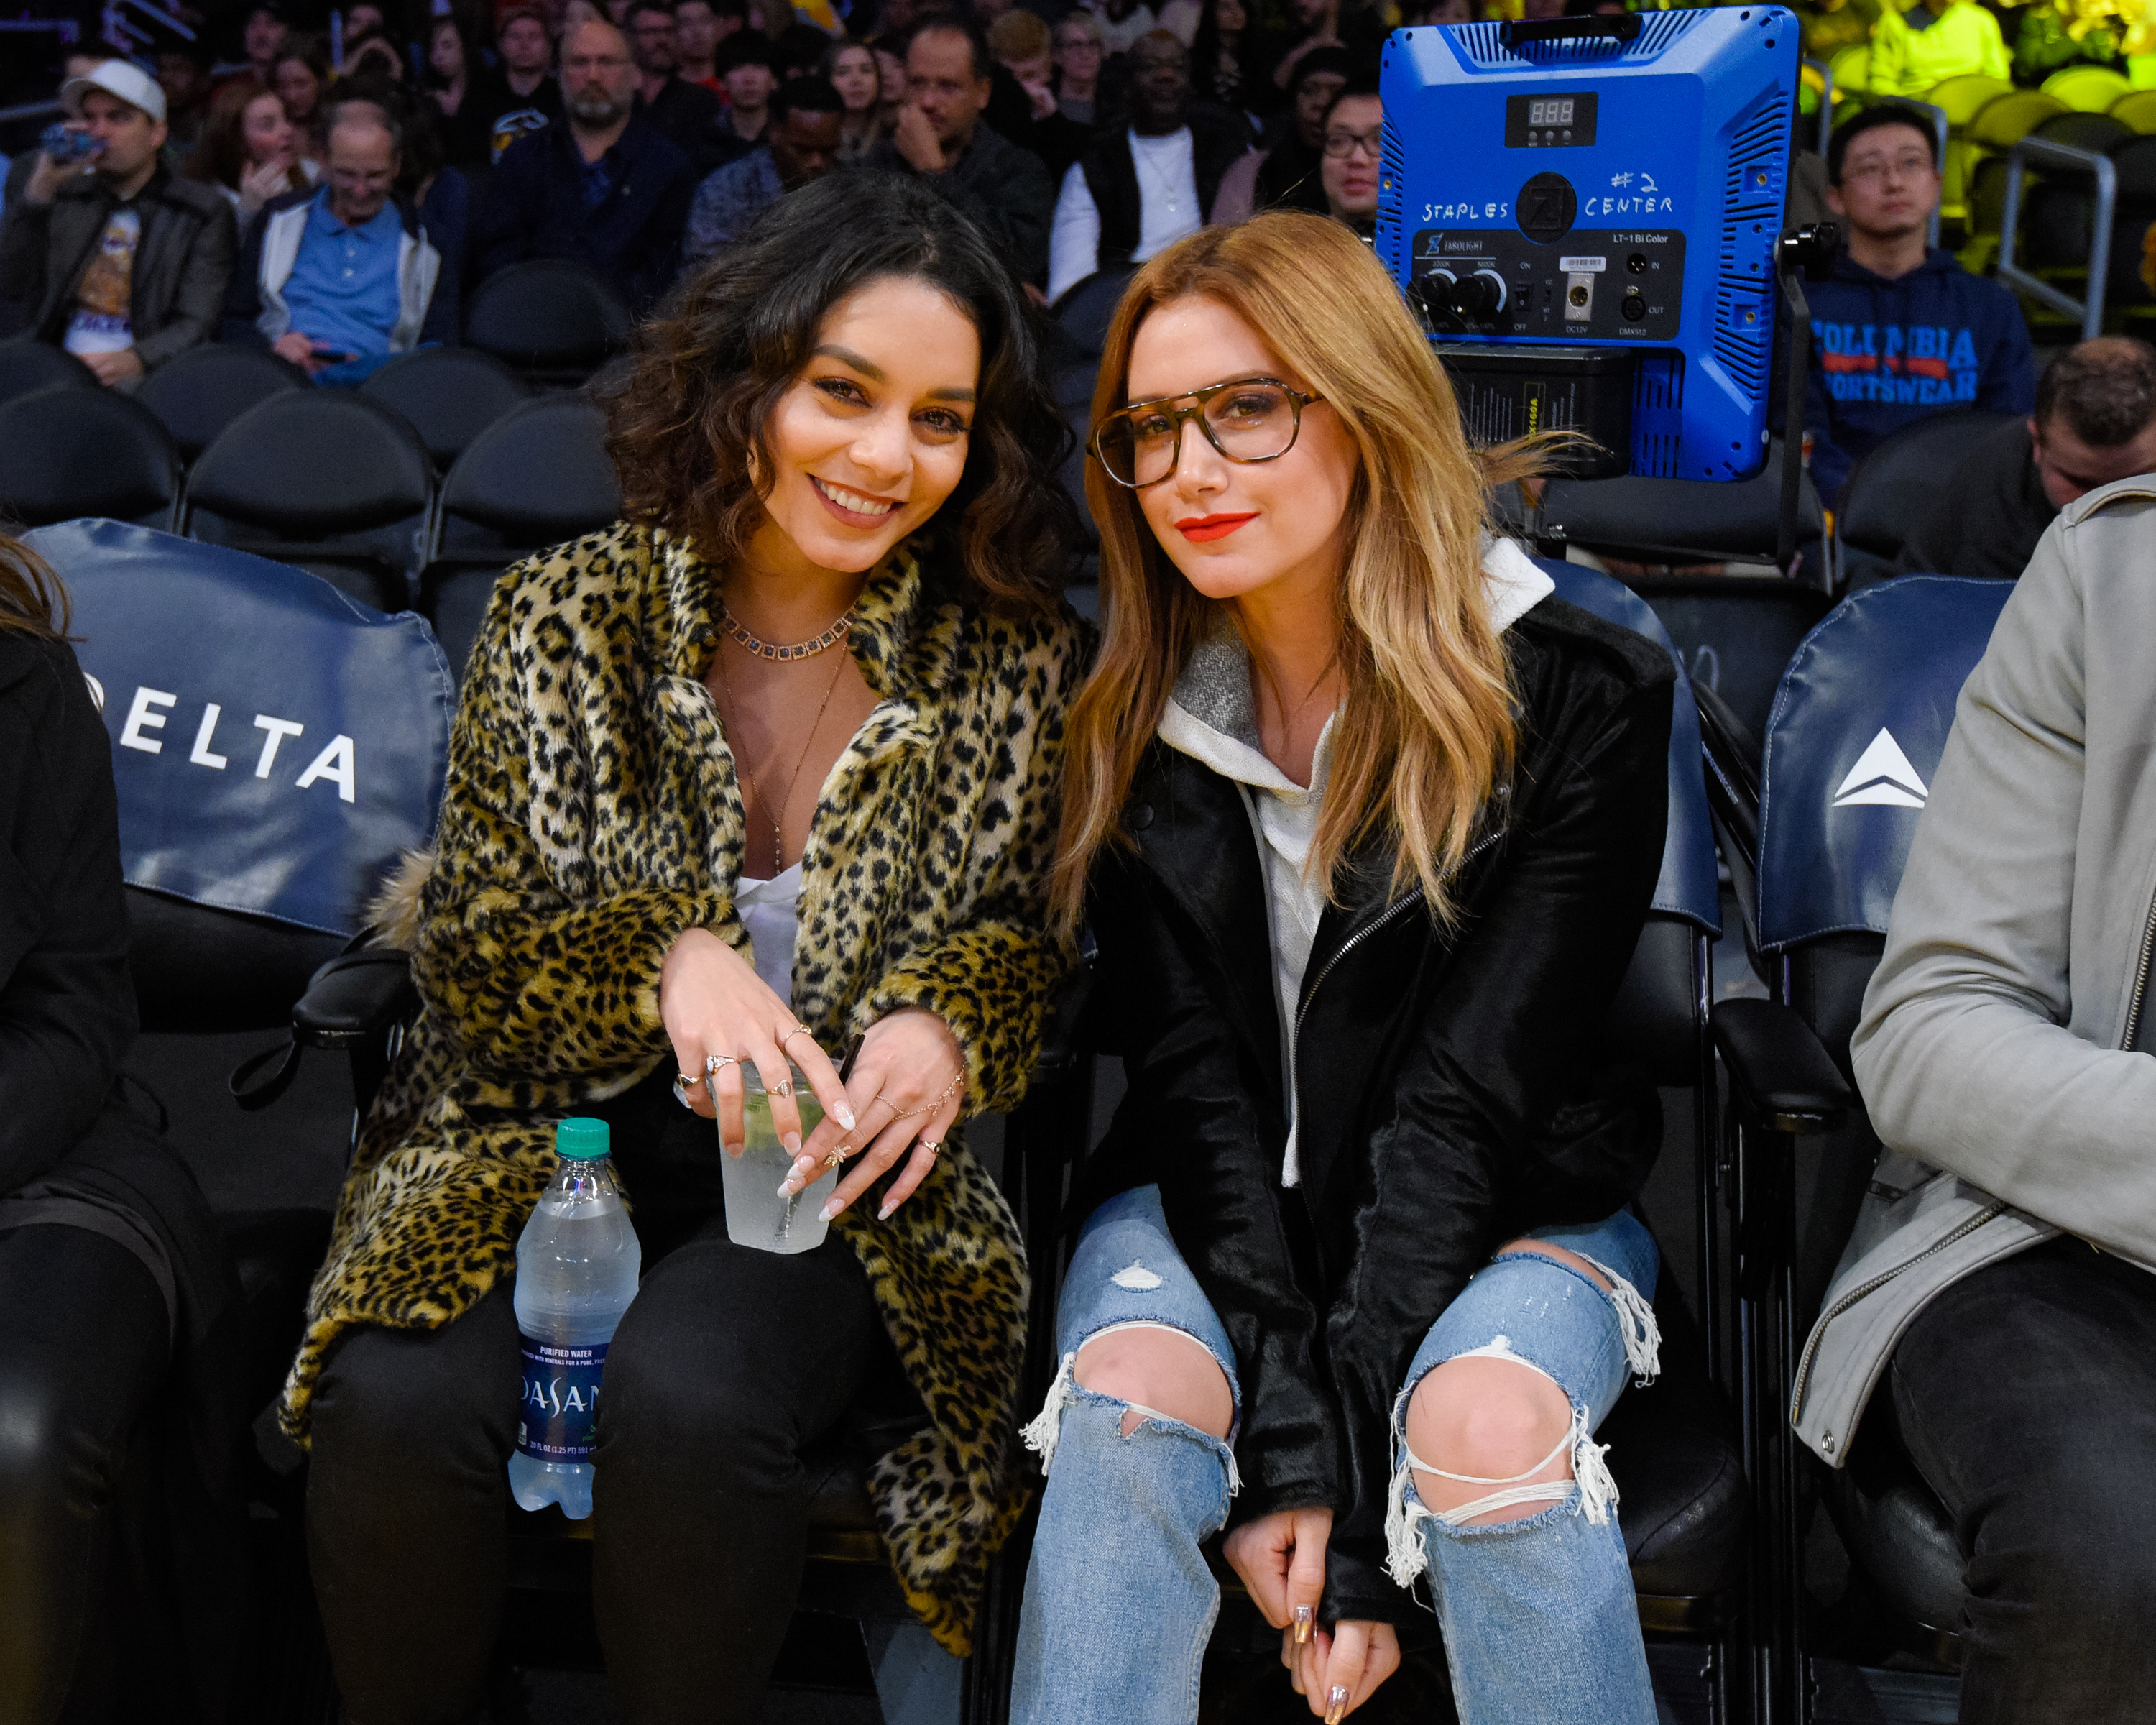 Vanessa Hudgens in leopard print coat and Ashley Tisdale in black jacket and ripped jeans sitting courtside at a basketball game